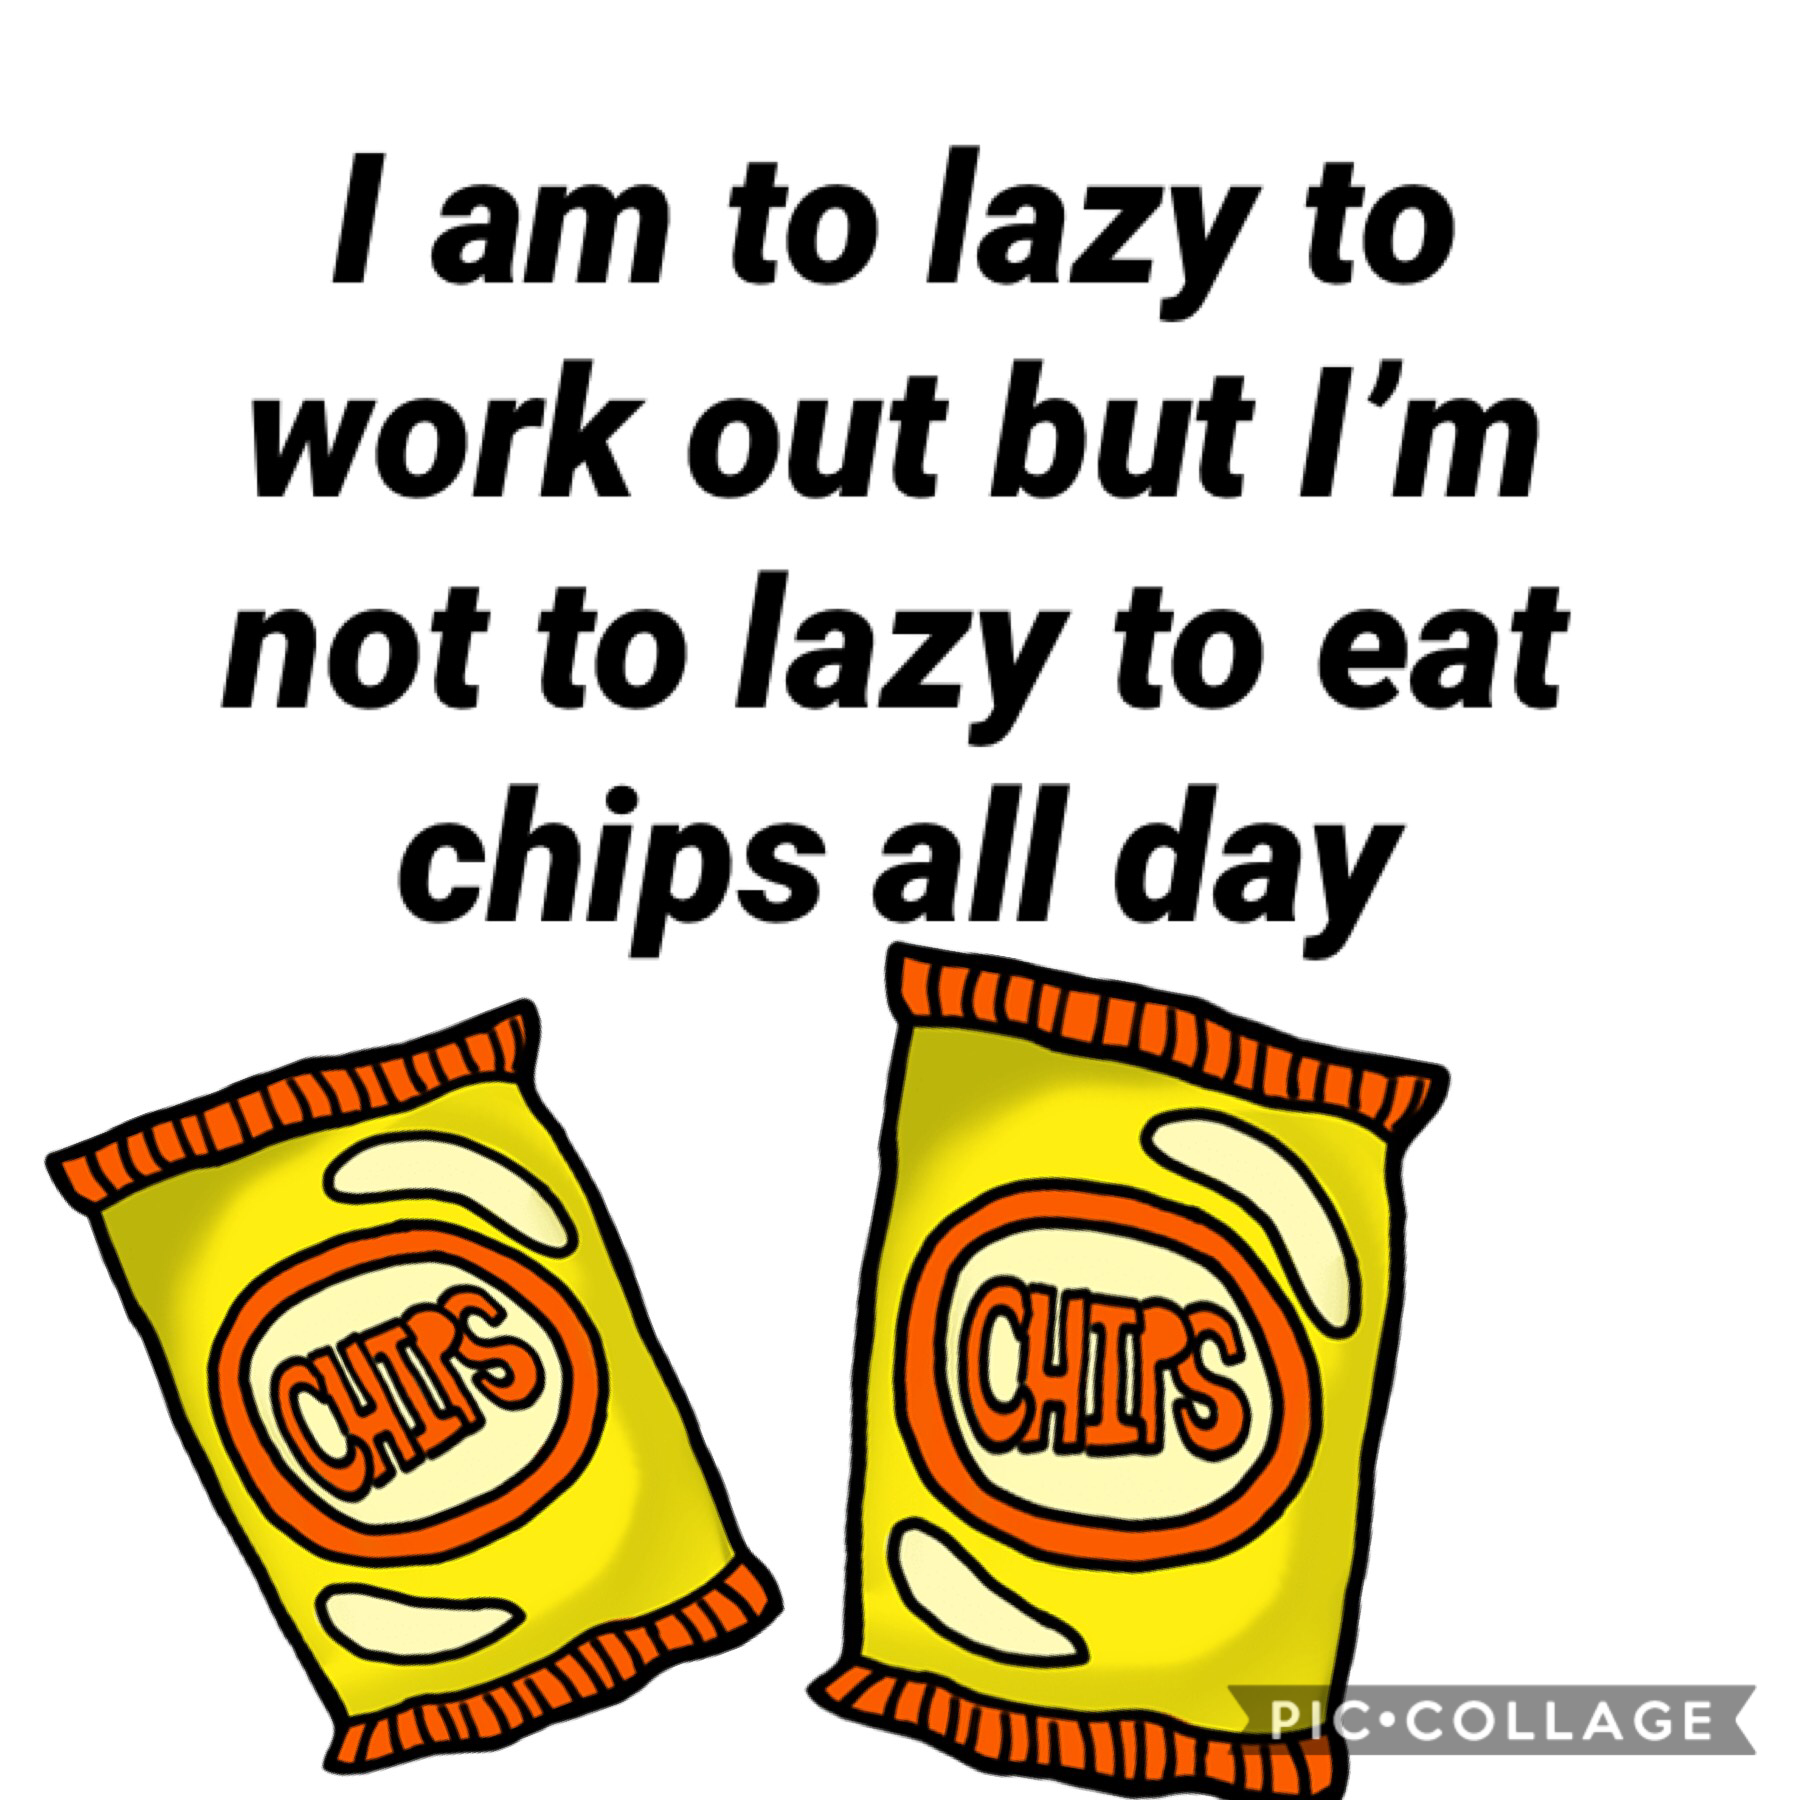 I will not work for nothing but o will work for chips